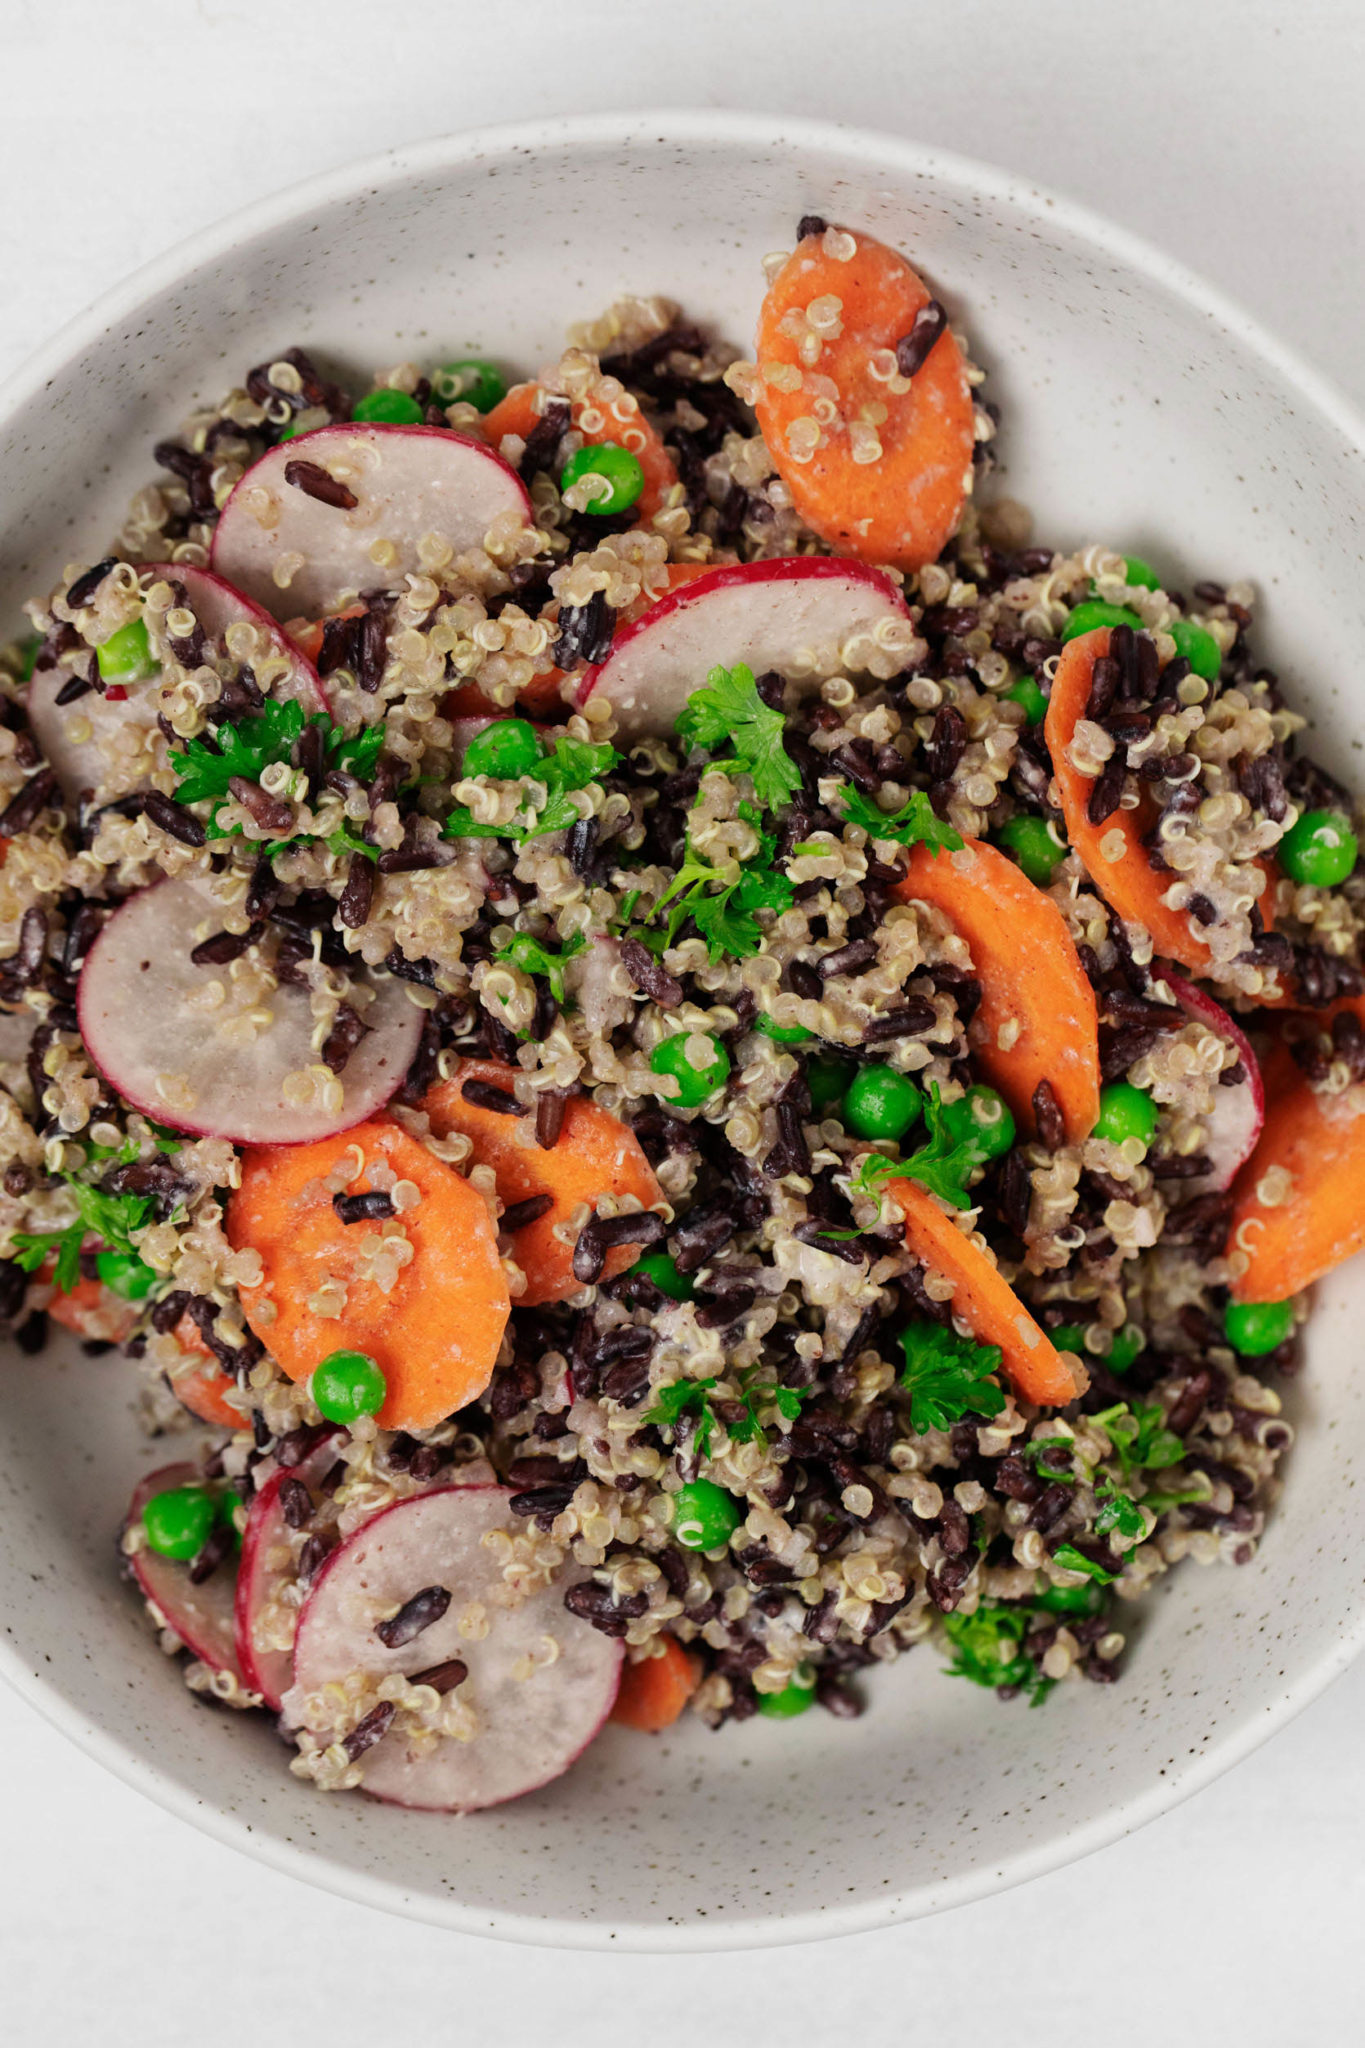 Spring Quinoa Black Rice Salad with Peas | The Full Helping